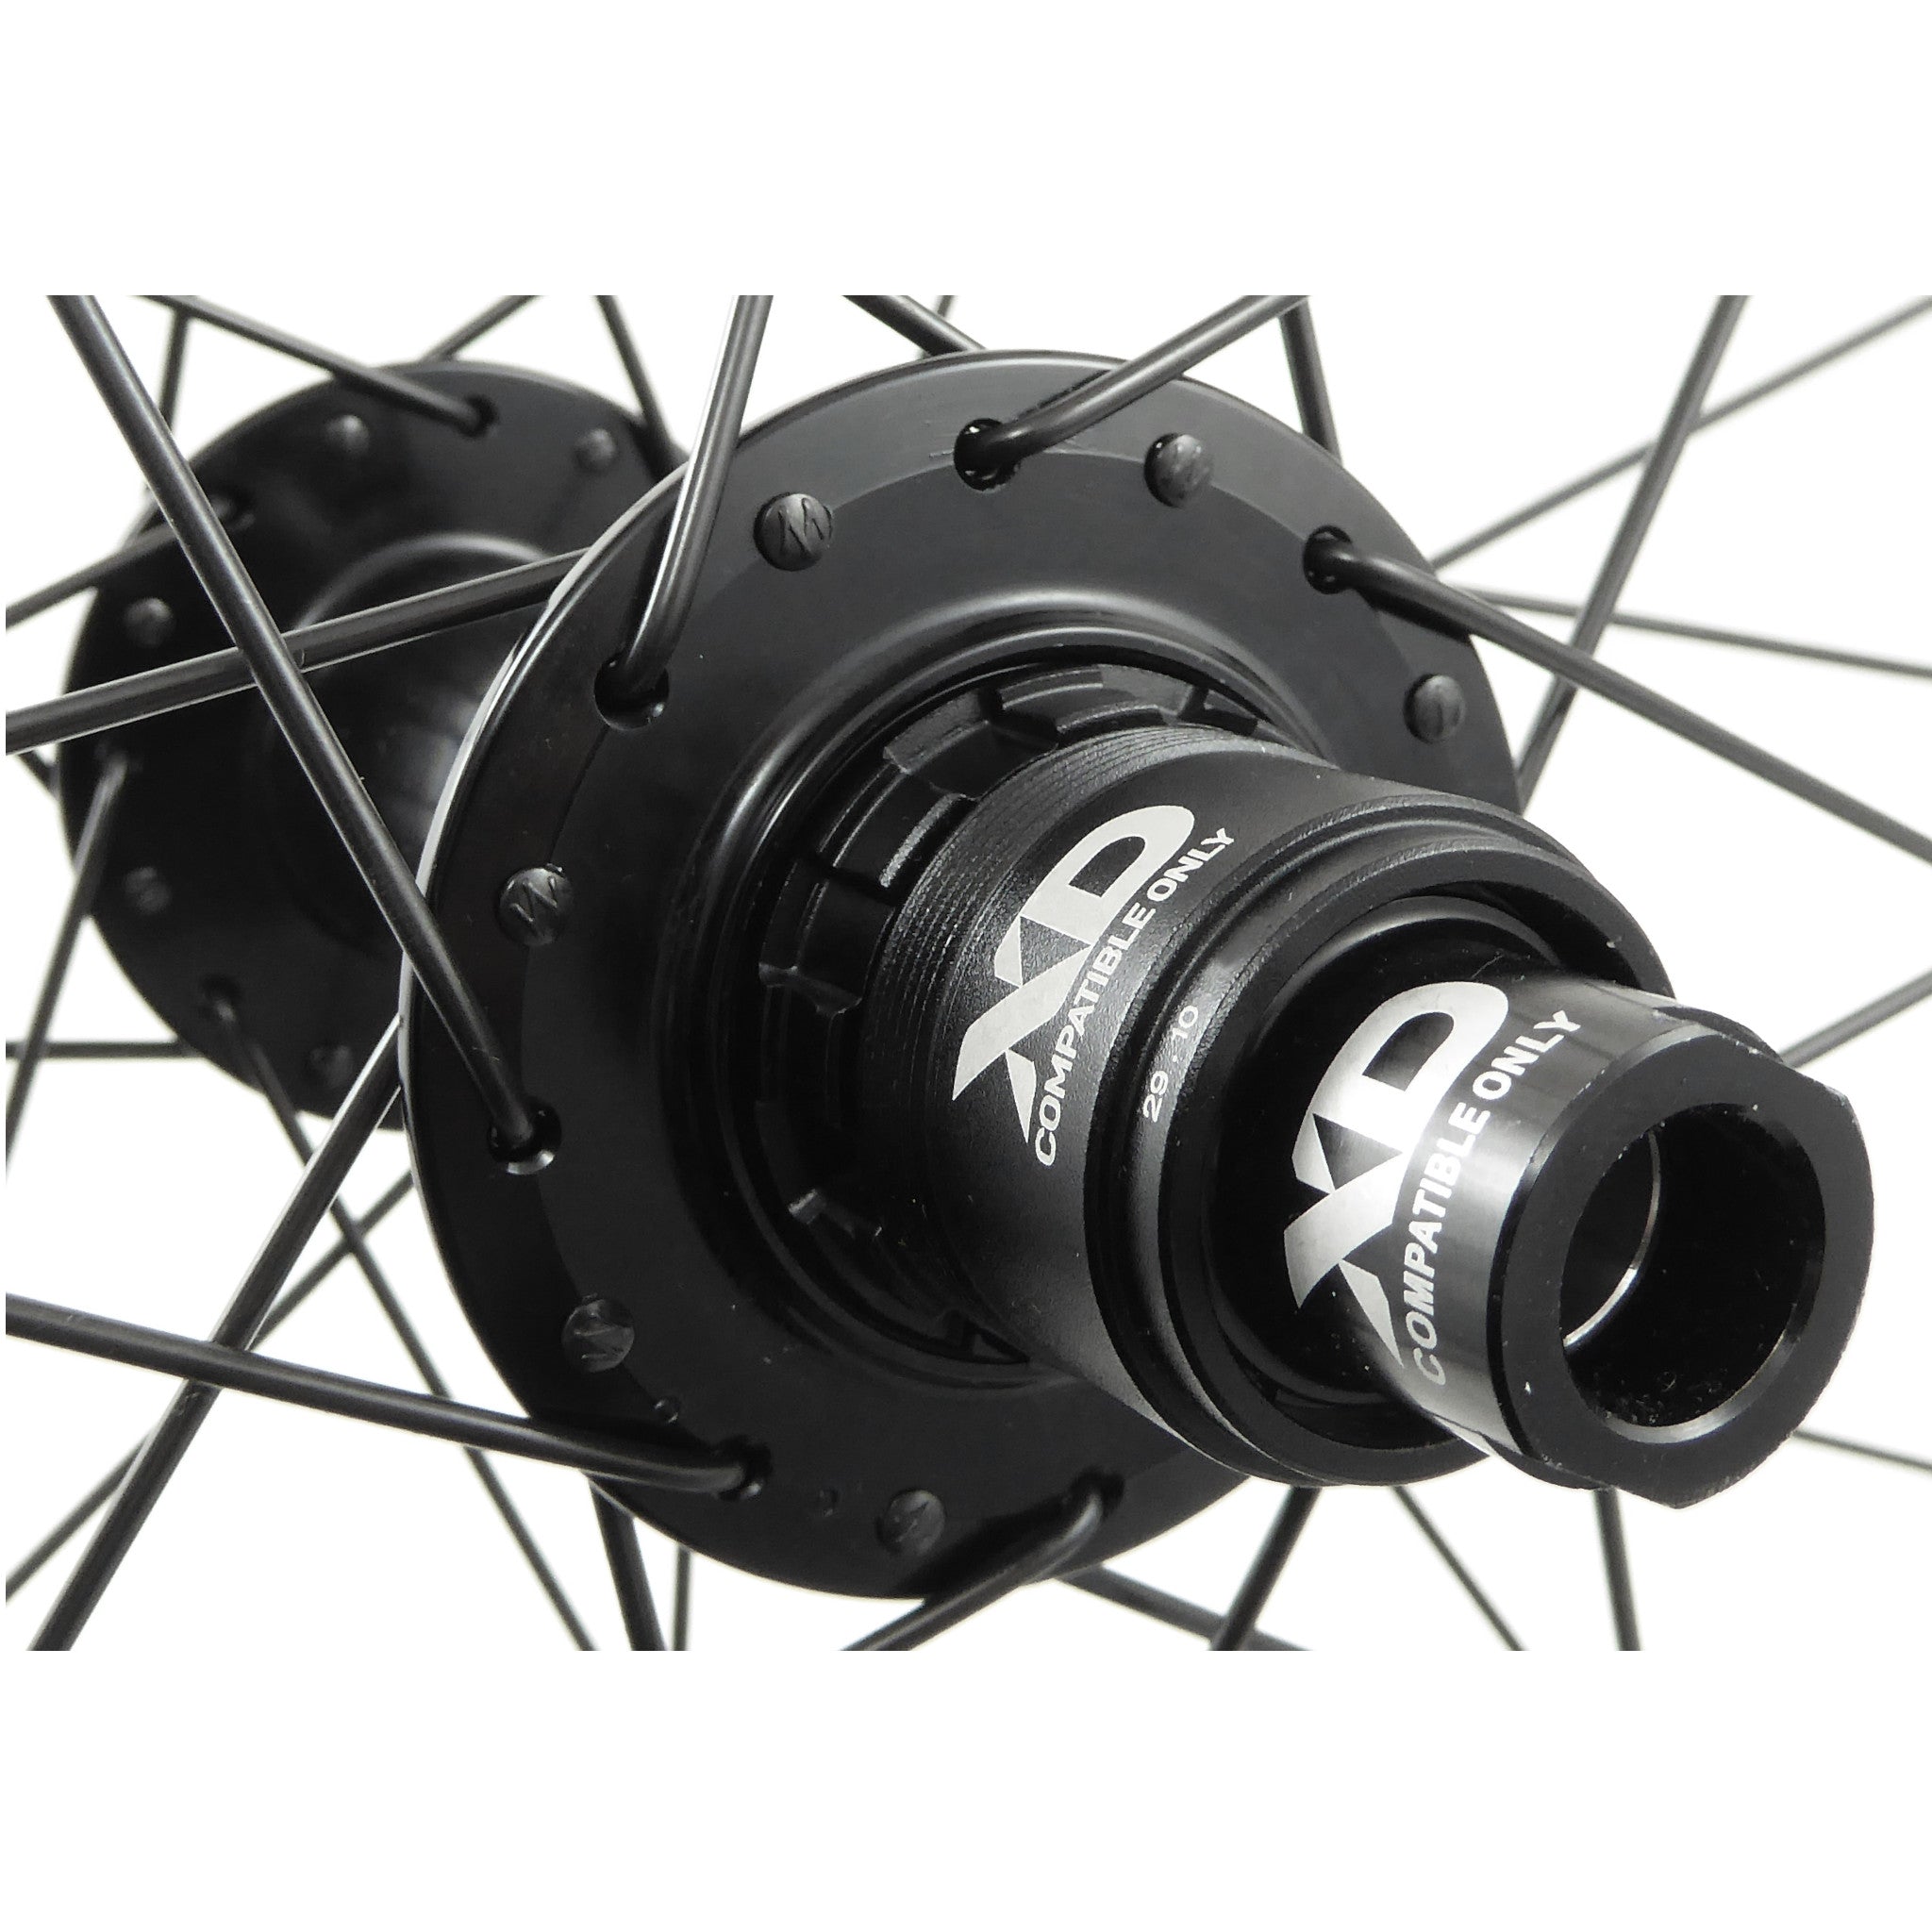 Photo showing the rear hub that is compatible with an XD Driver.